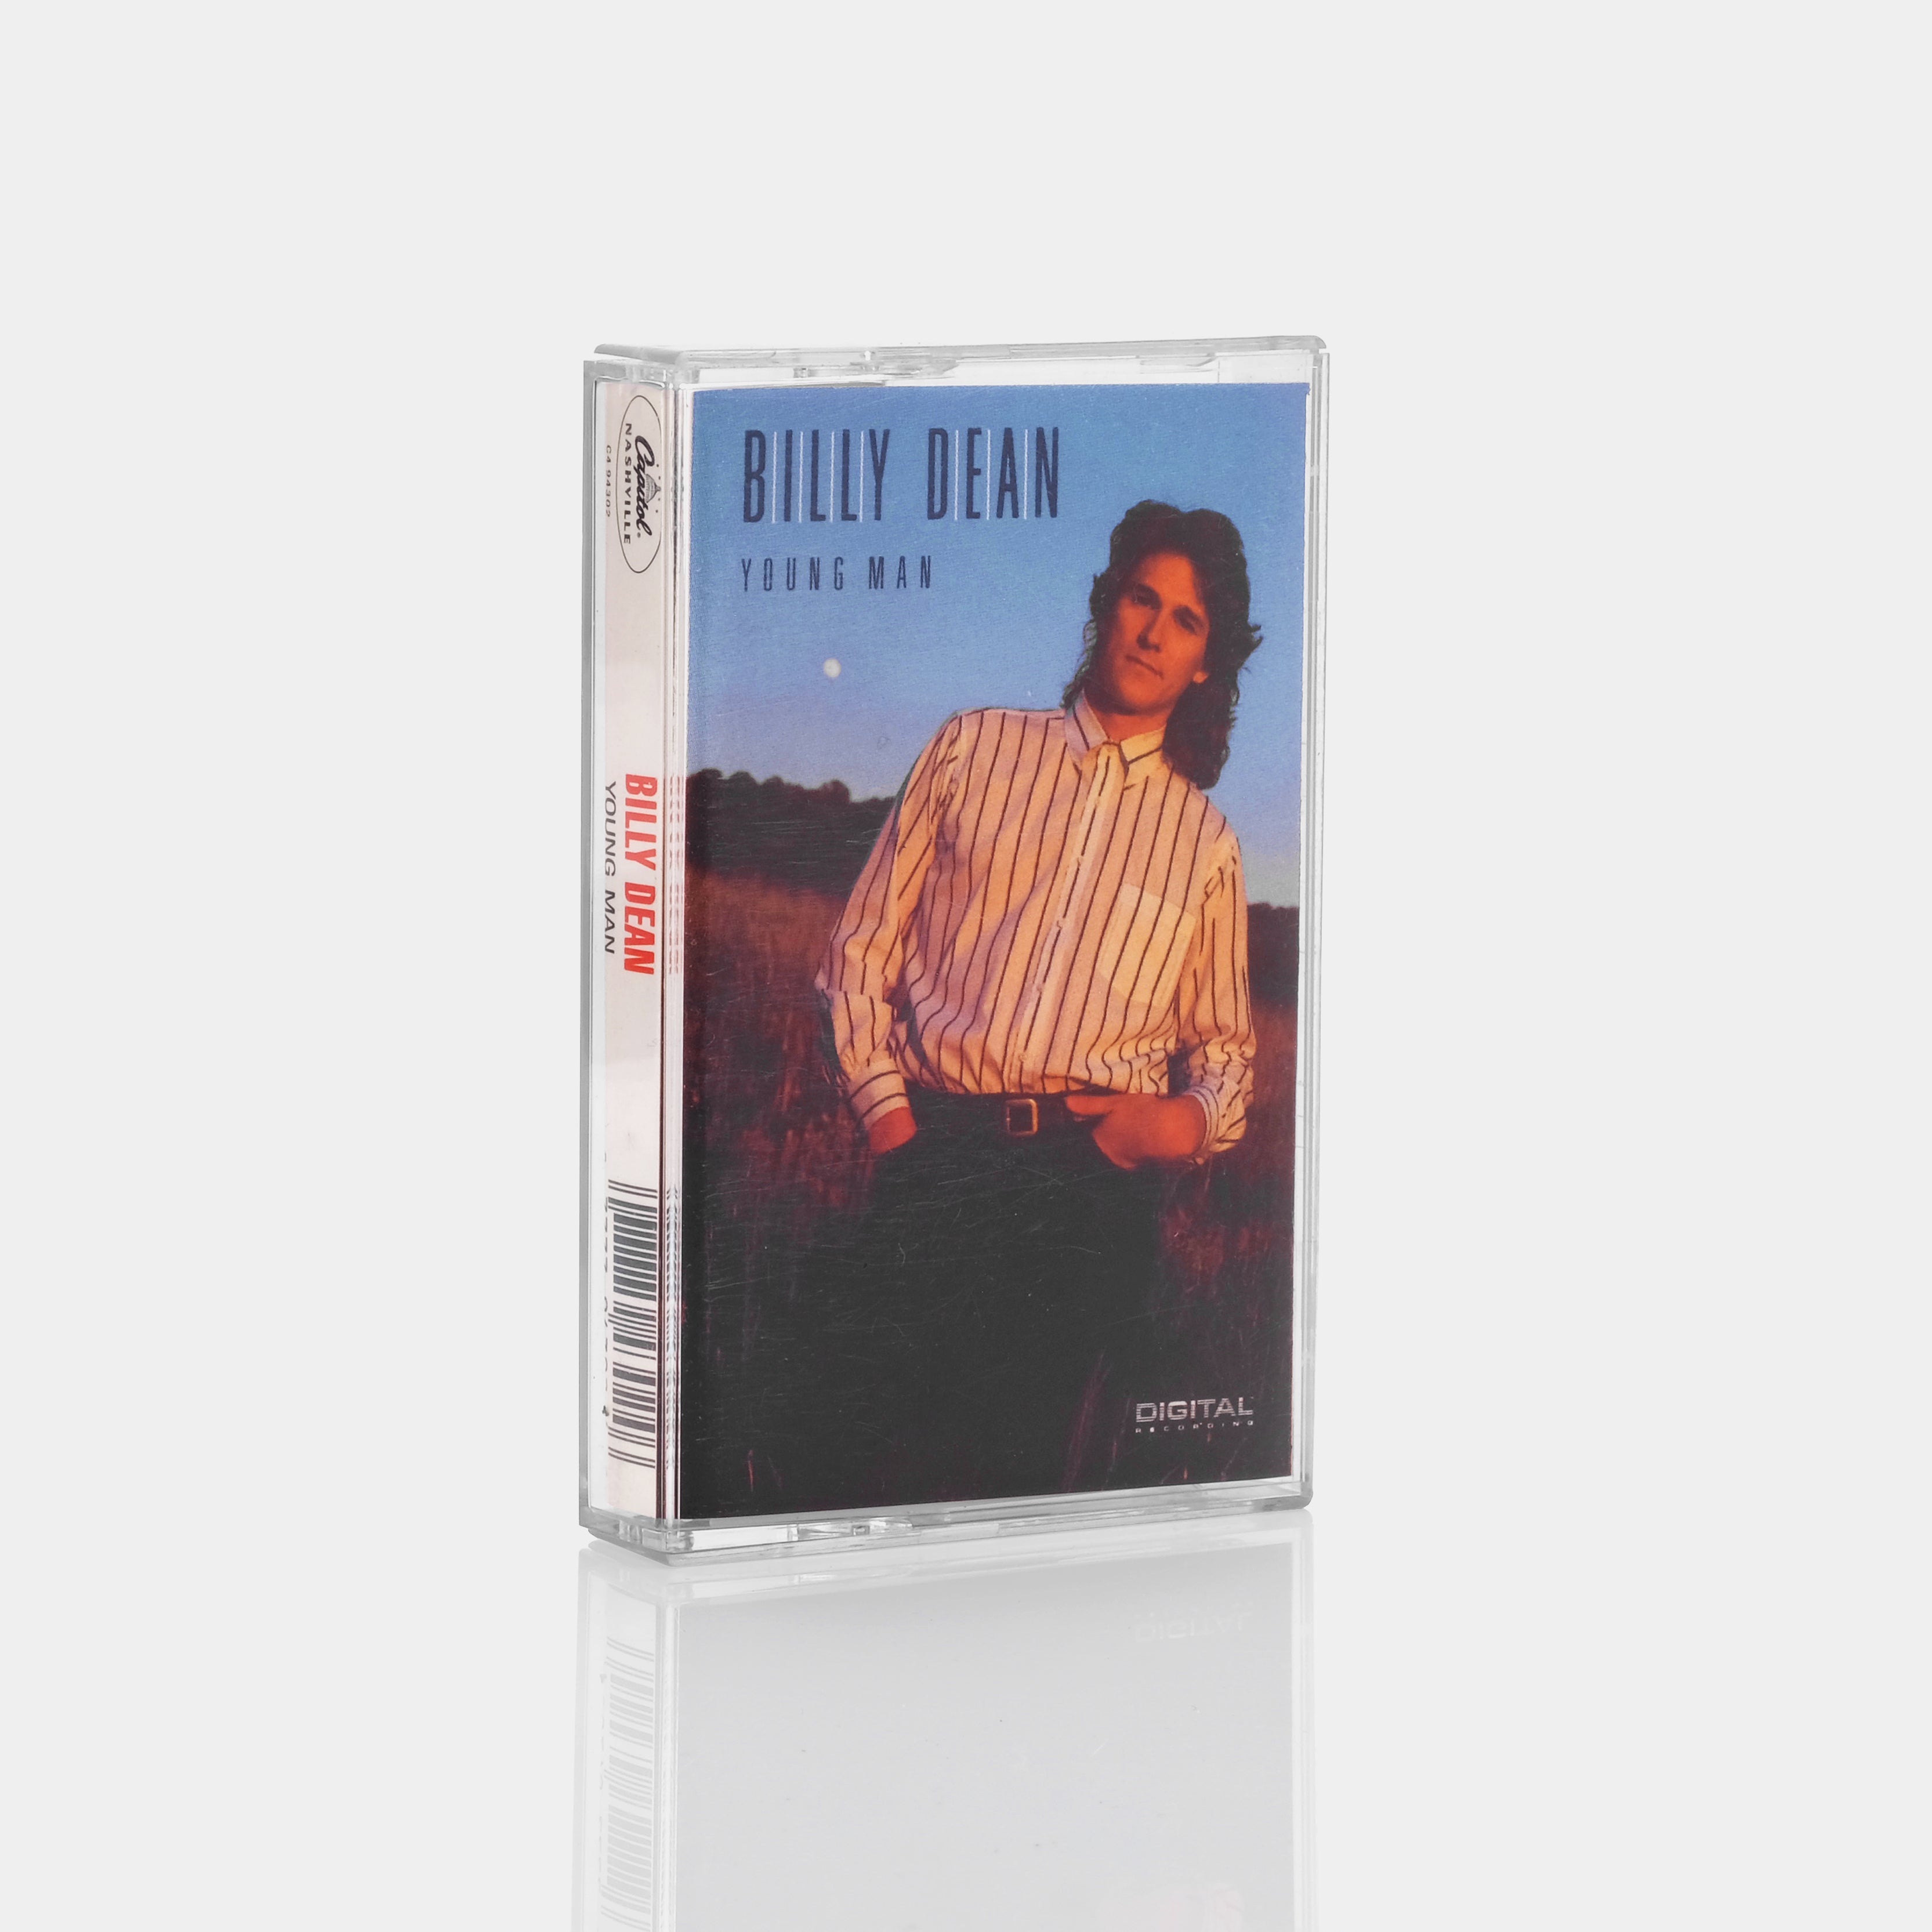 Billy Dean - Young Man Cassette Tape